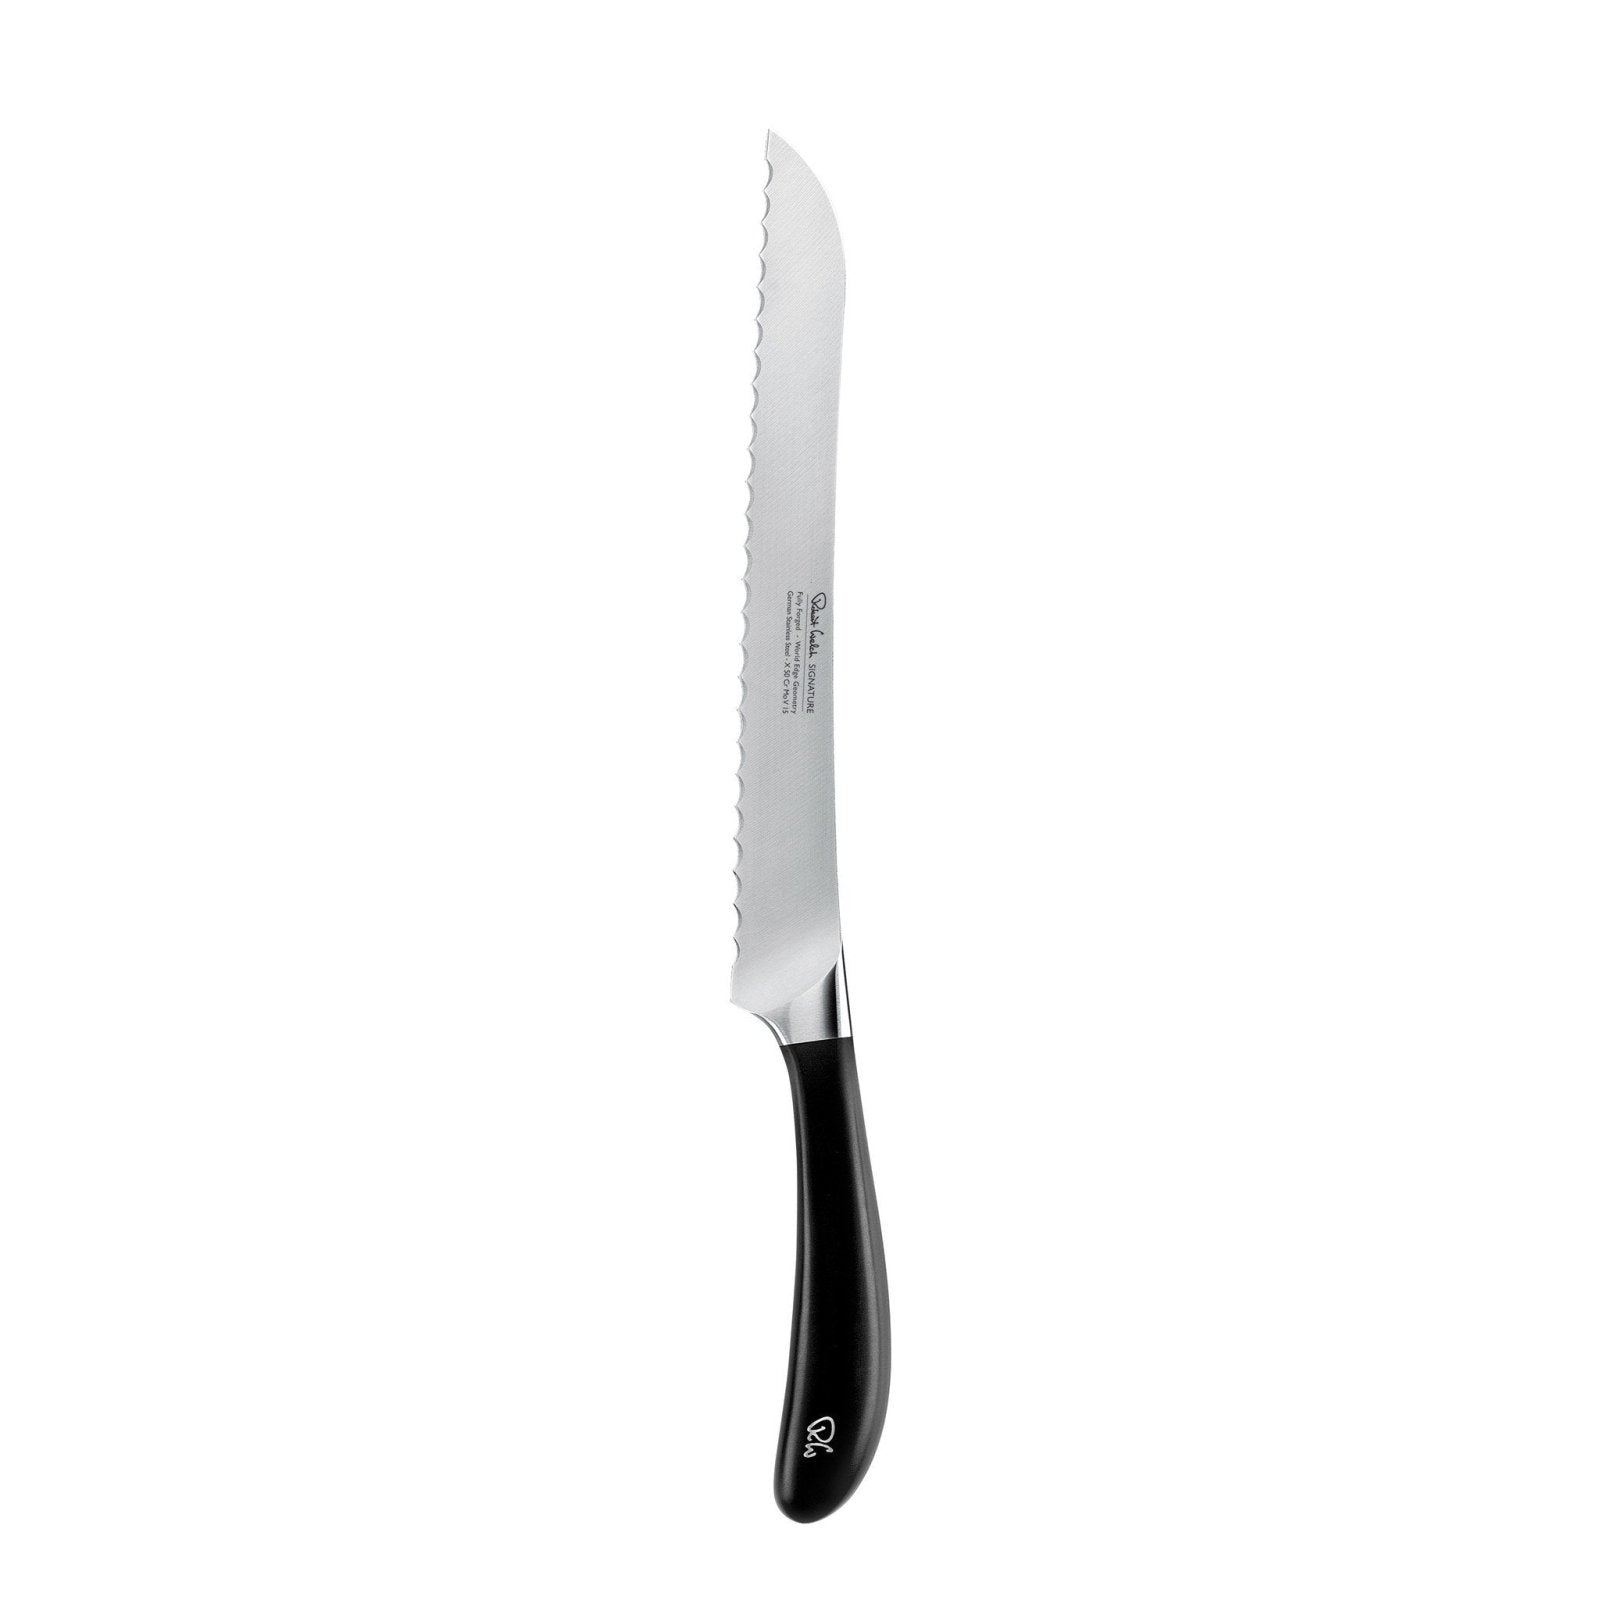 Robert Welch Signature Bread Knife - SIGSA2001V - The Cotswold Knife Company